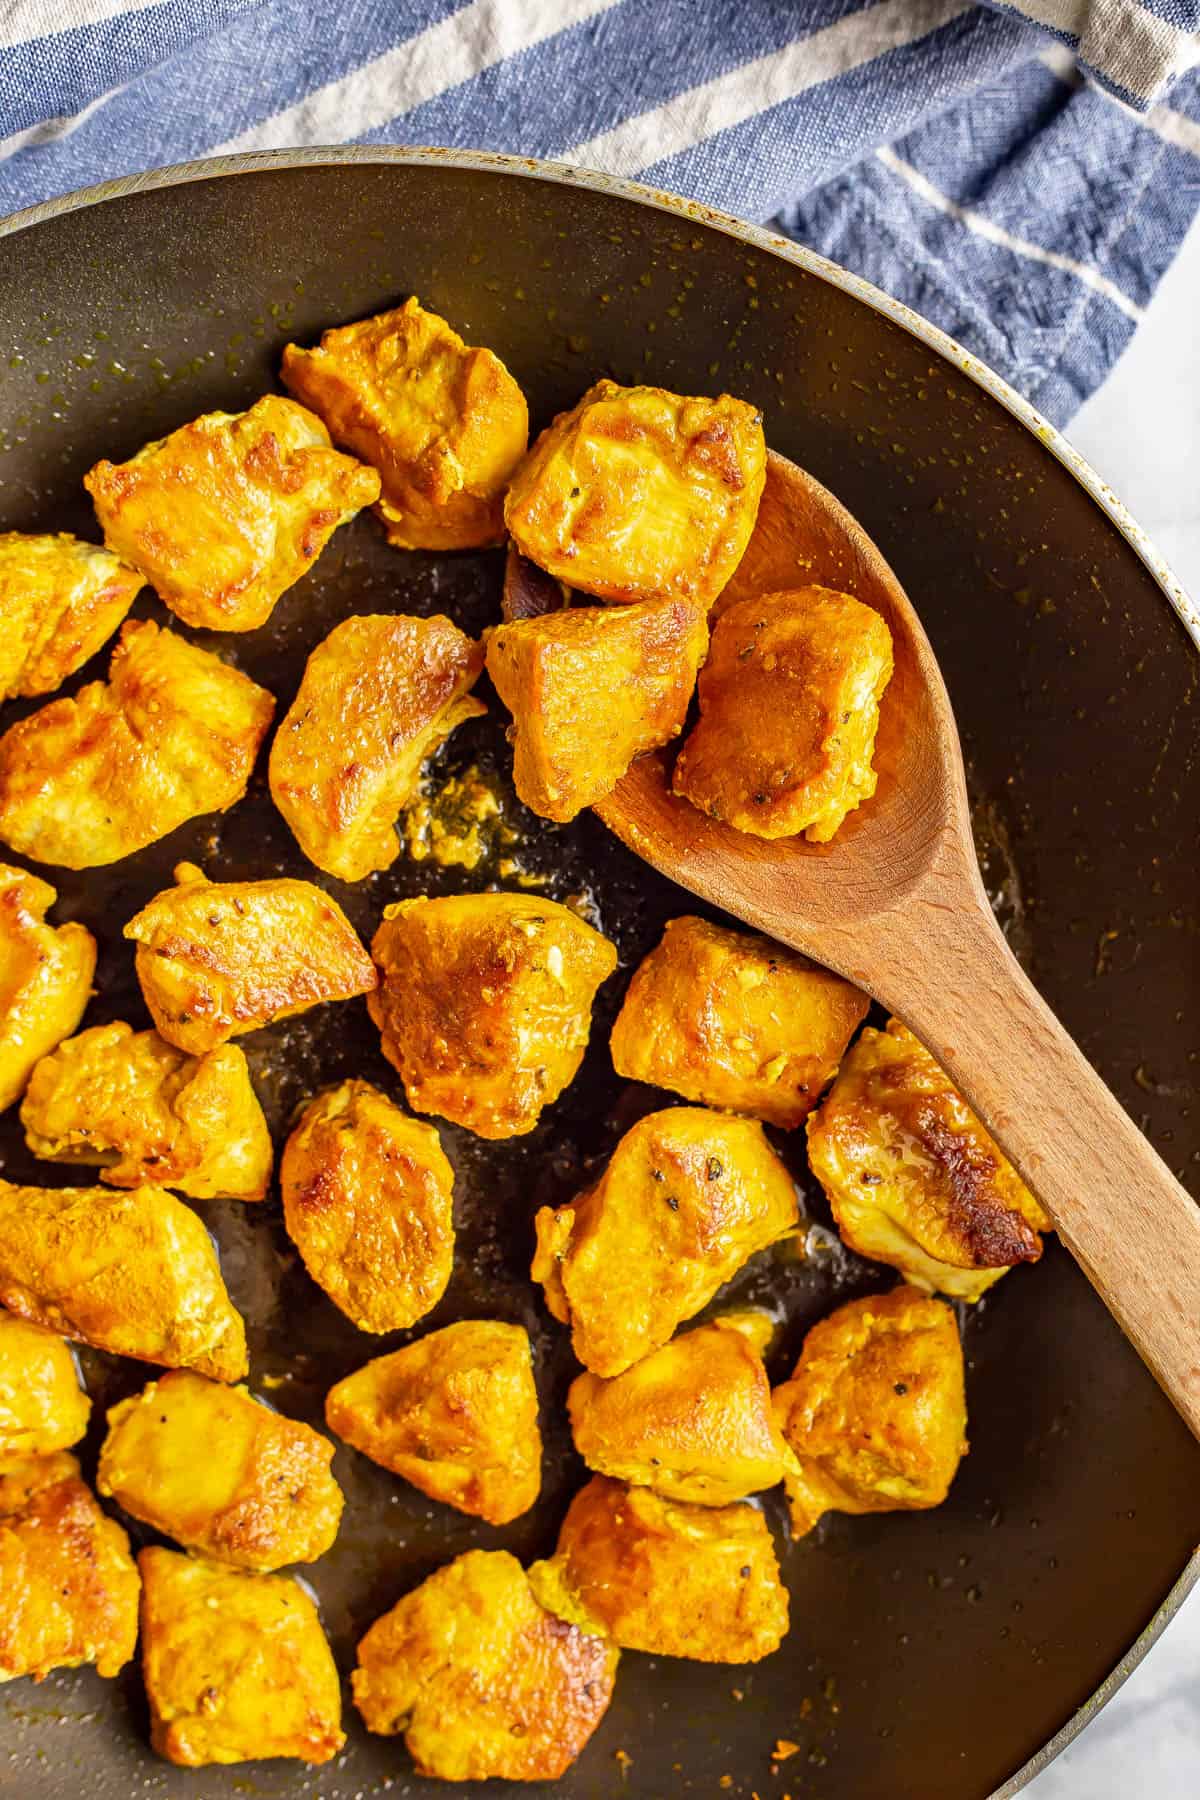 Cooked cubed turmeric chicken pieces scooped onto a wooden spoon resting in a large dark skillet.